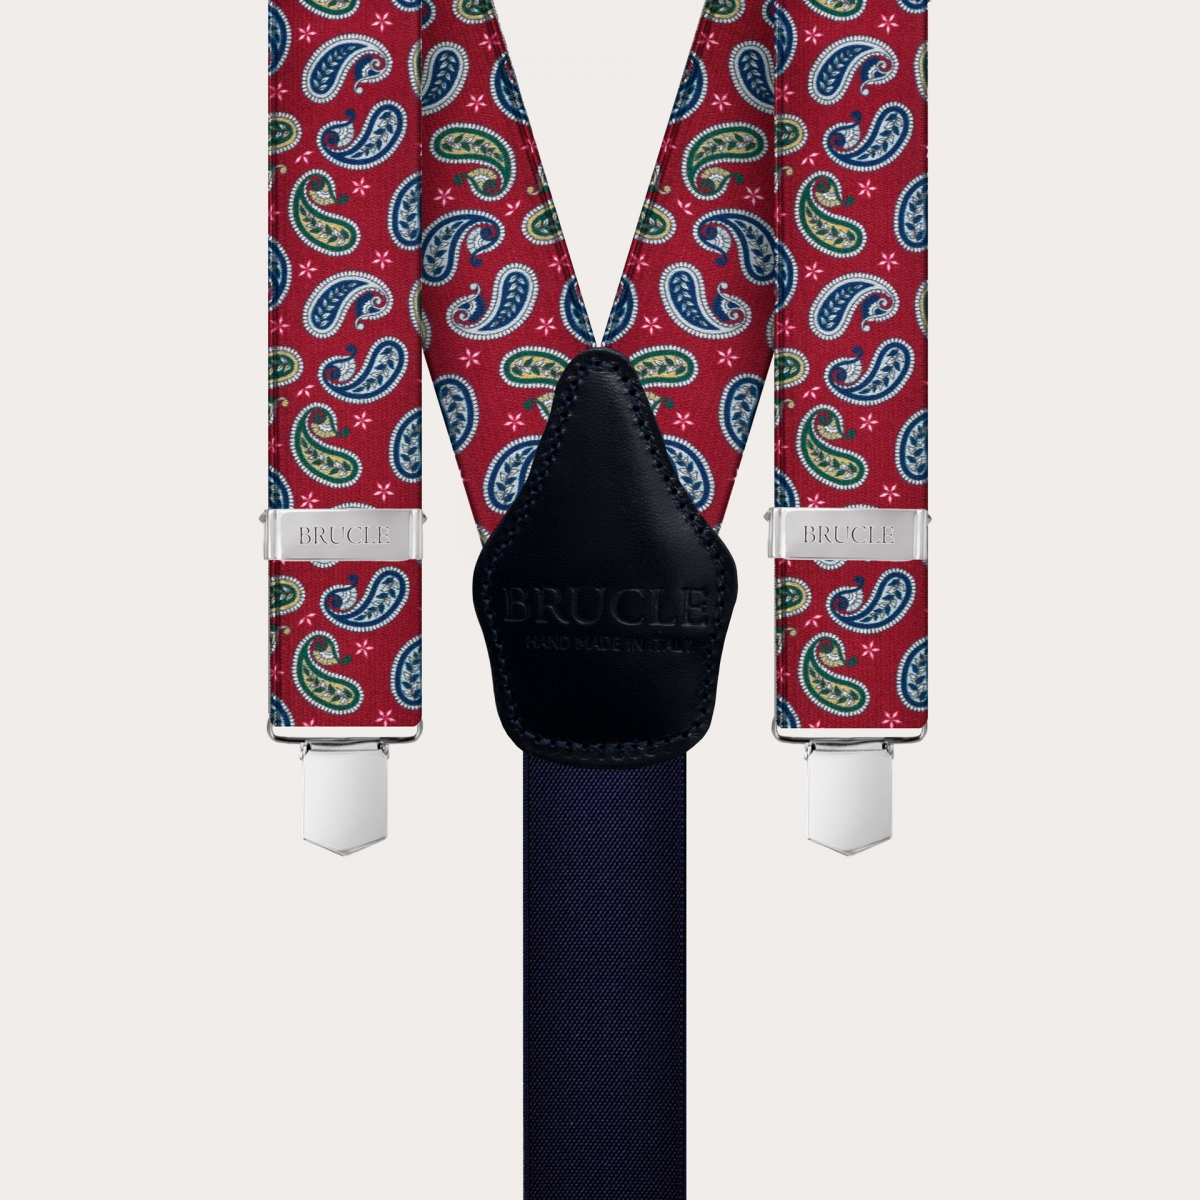 BRUCLE Y-shape suspenders with satin effect, red paisley pattern